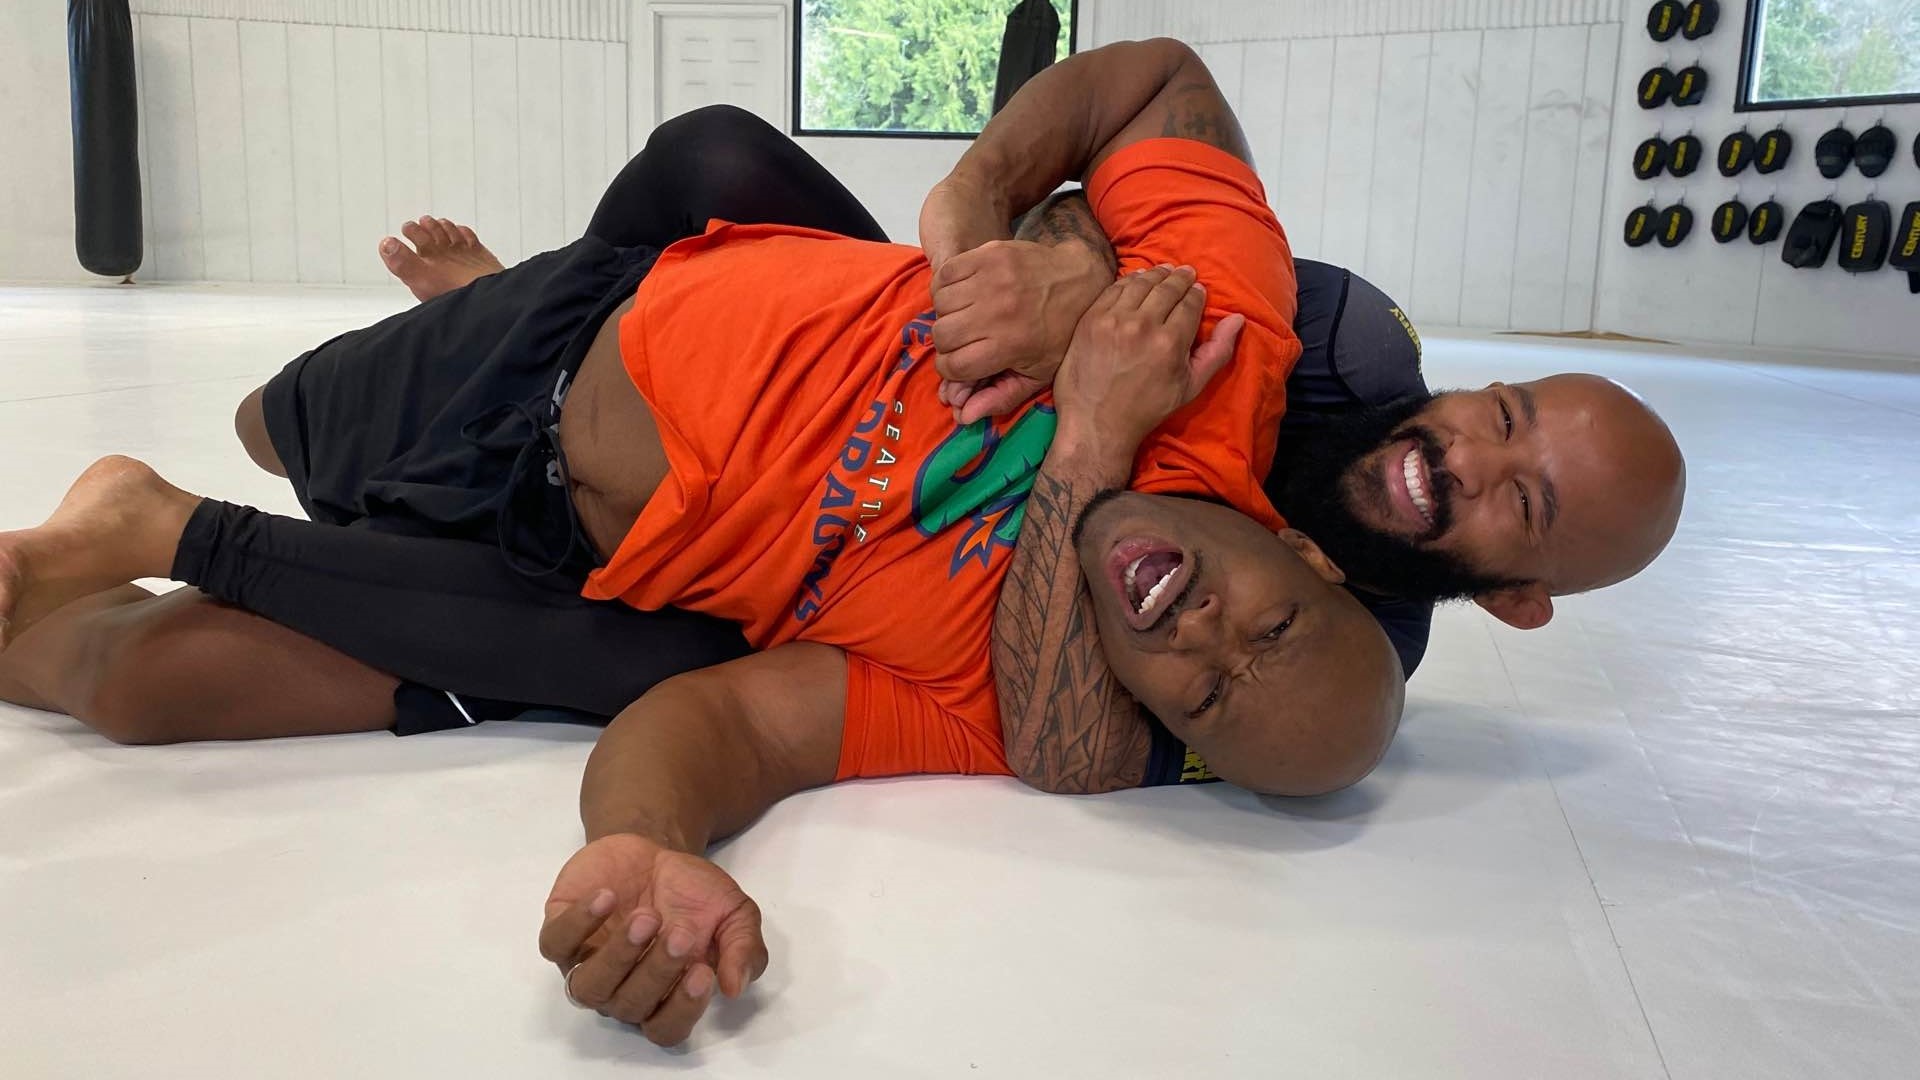 Terry steps into the ring with Demetrious "Mighty Mouse" Johnson for a lesson in mixed martial arts.